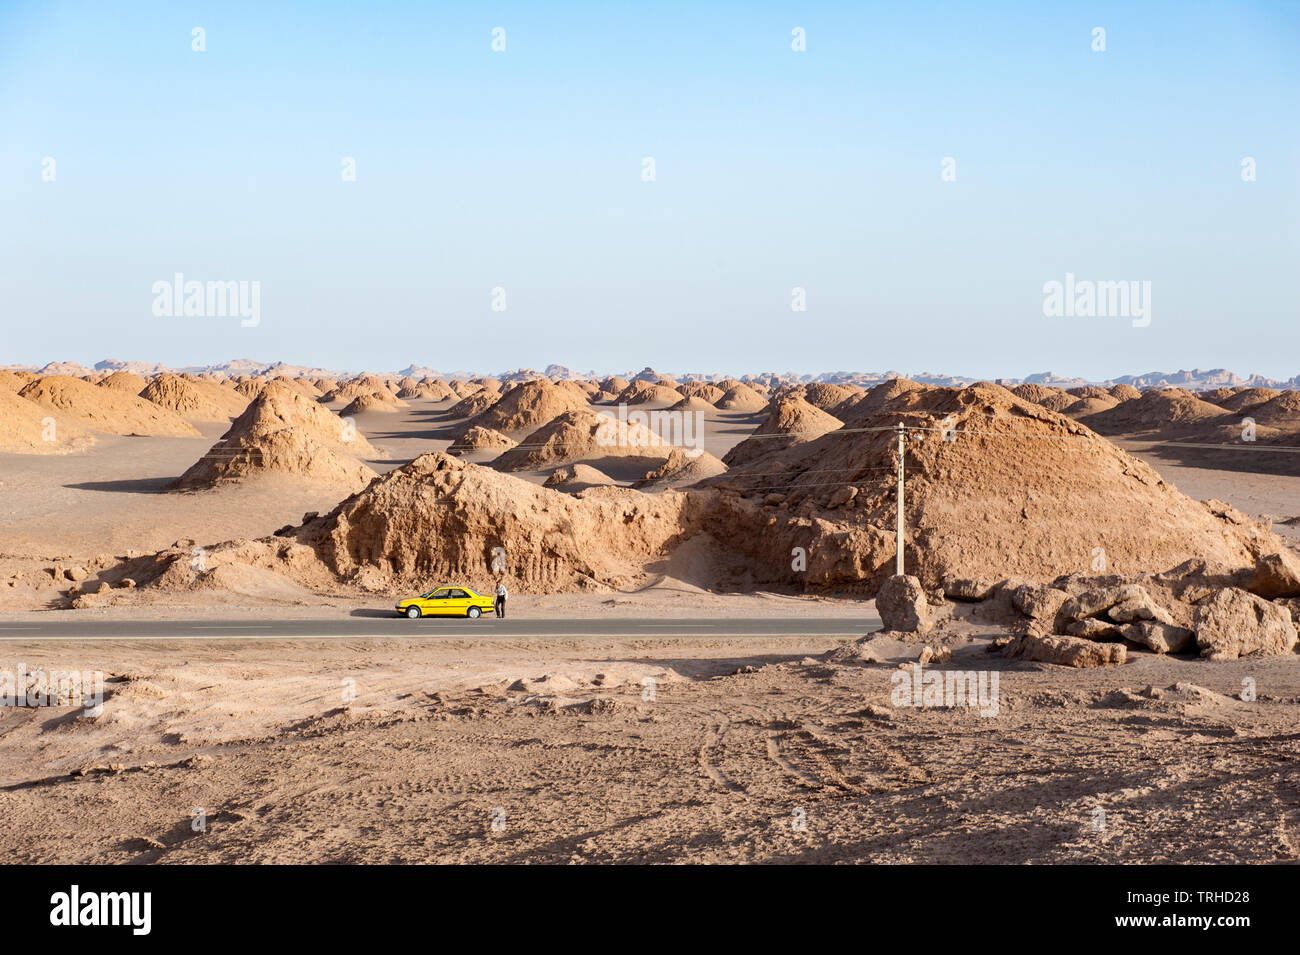 A car parked by the side of the road with yardangs in the background in the Lut Desert in Shahad, Iran. Known as kaluts in Iran, yardangs are geologic Stock Photo